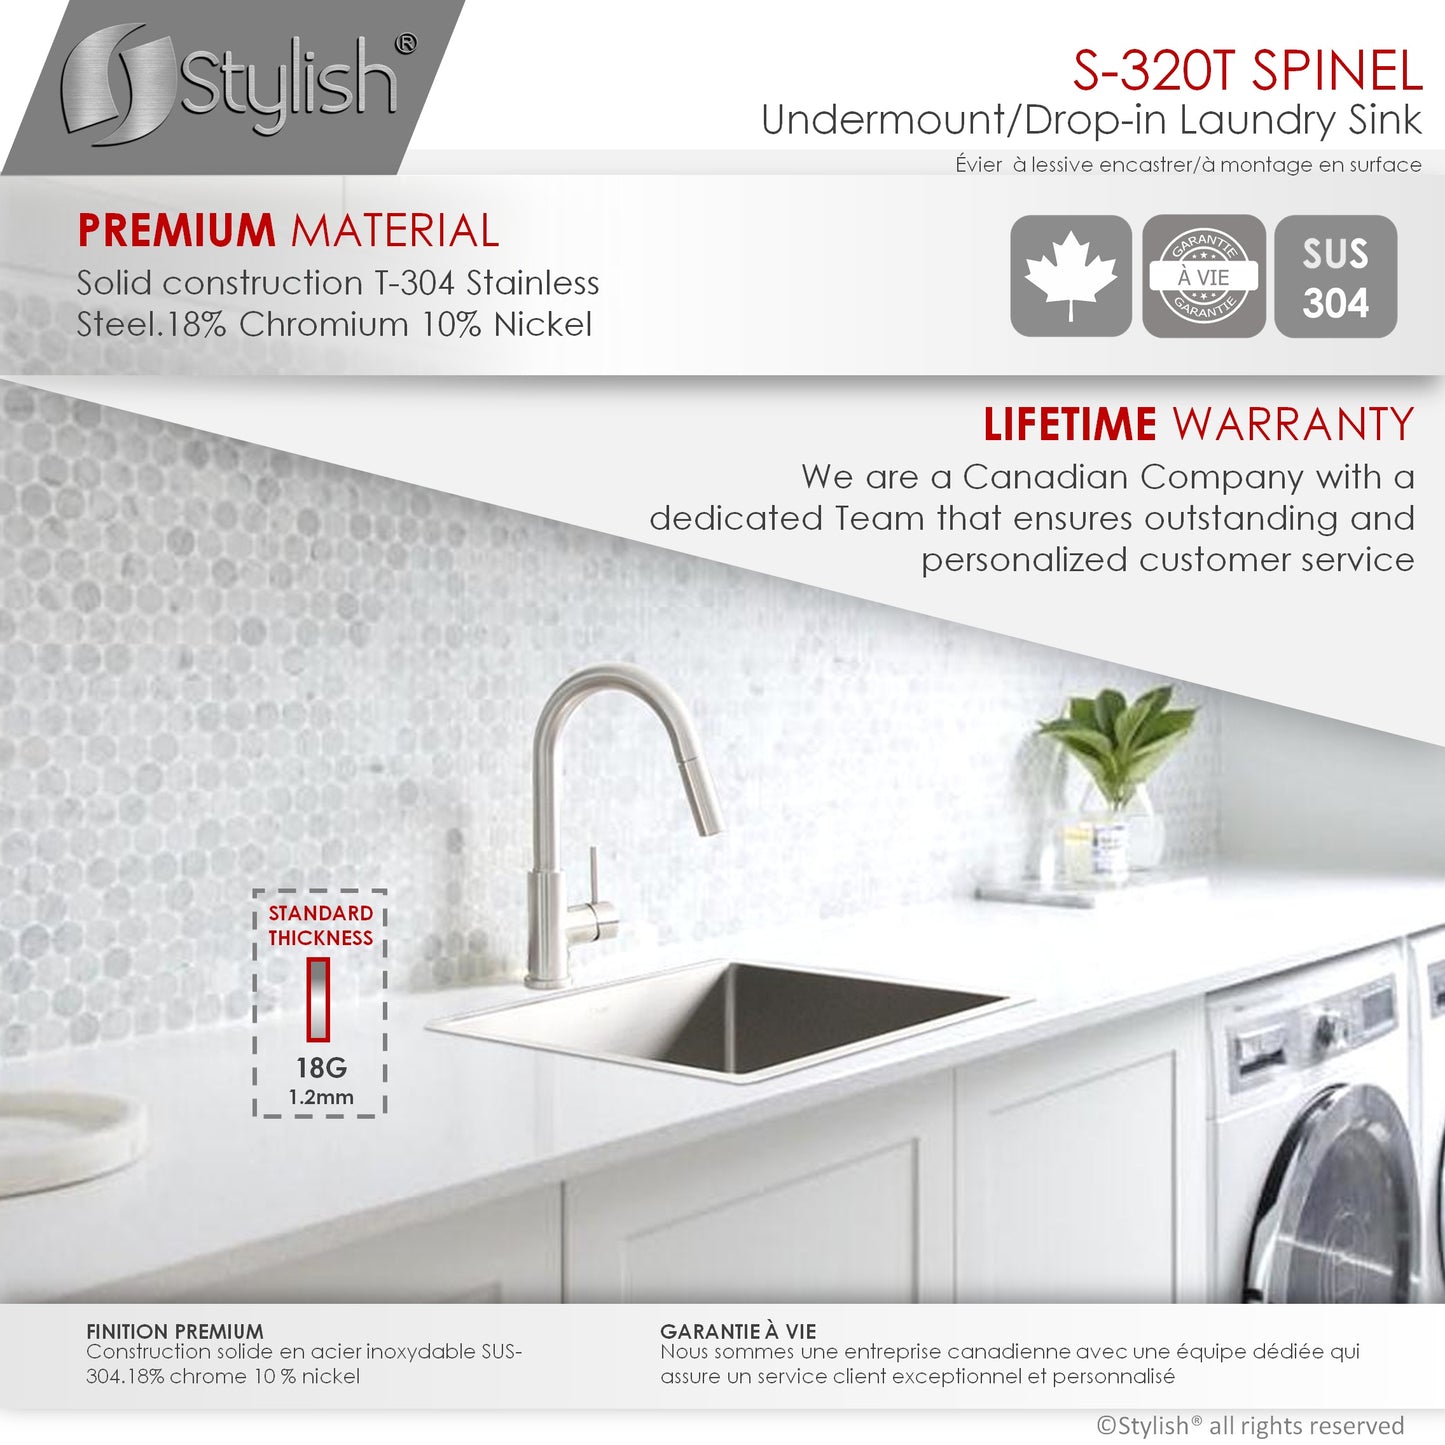 STYLISH 22" x 18" Spinel Single Bowl Undermount and Drop-in Stainless Steel Laundry Sink S-320T